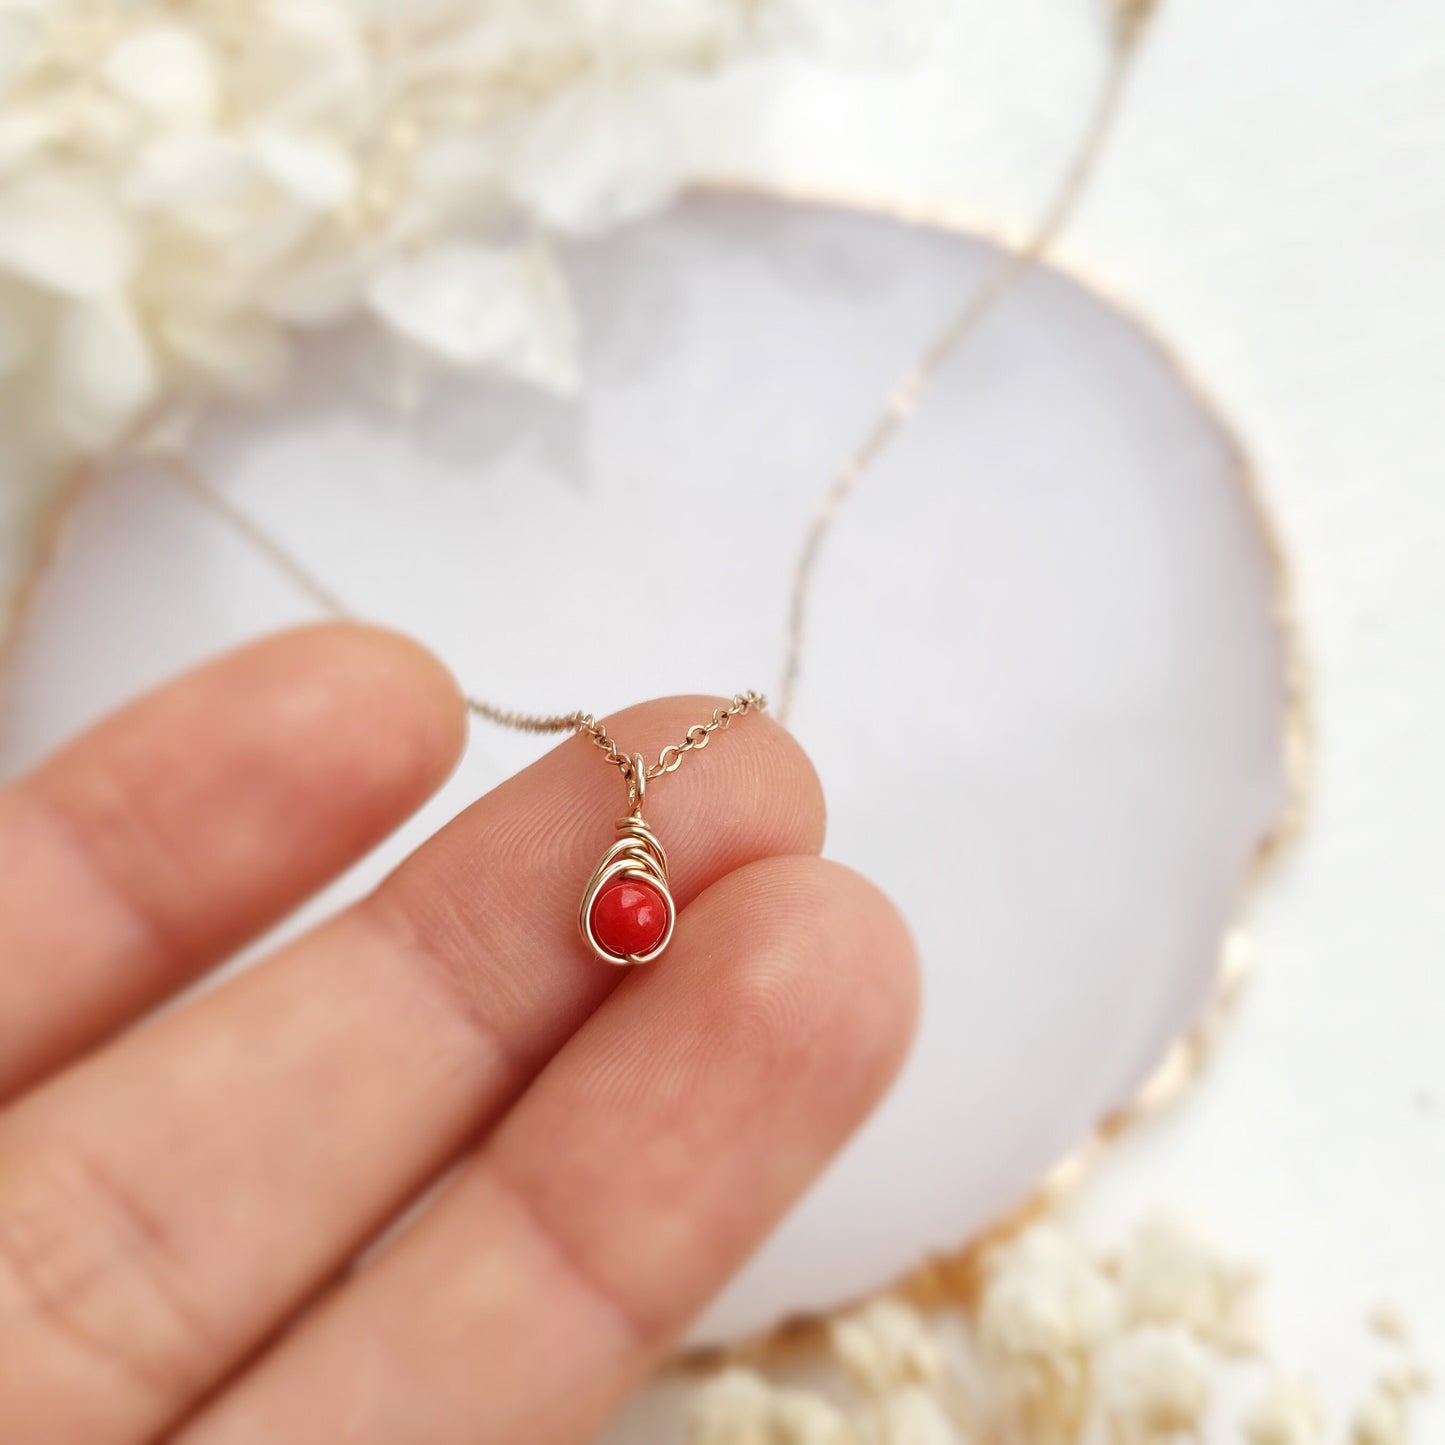 Dainty Red Coral Necklace